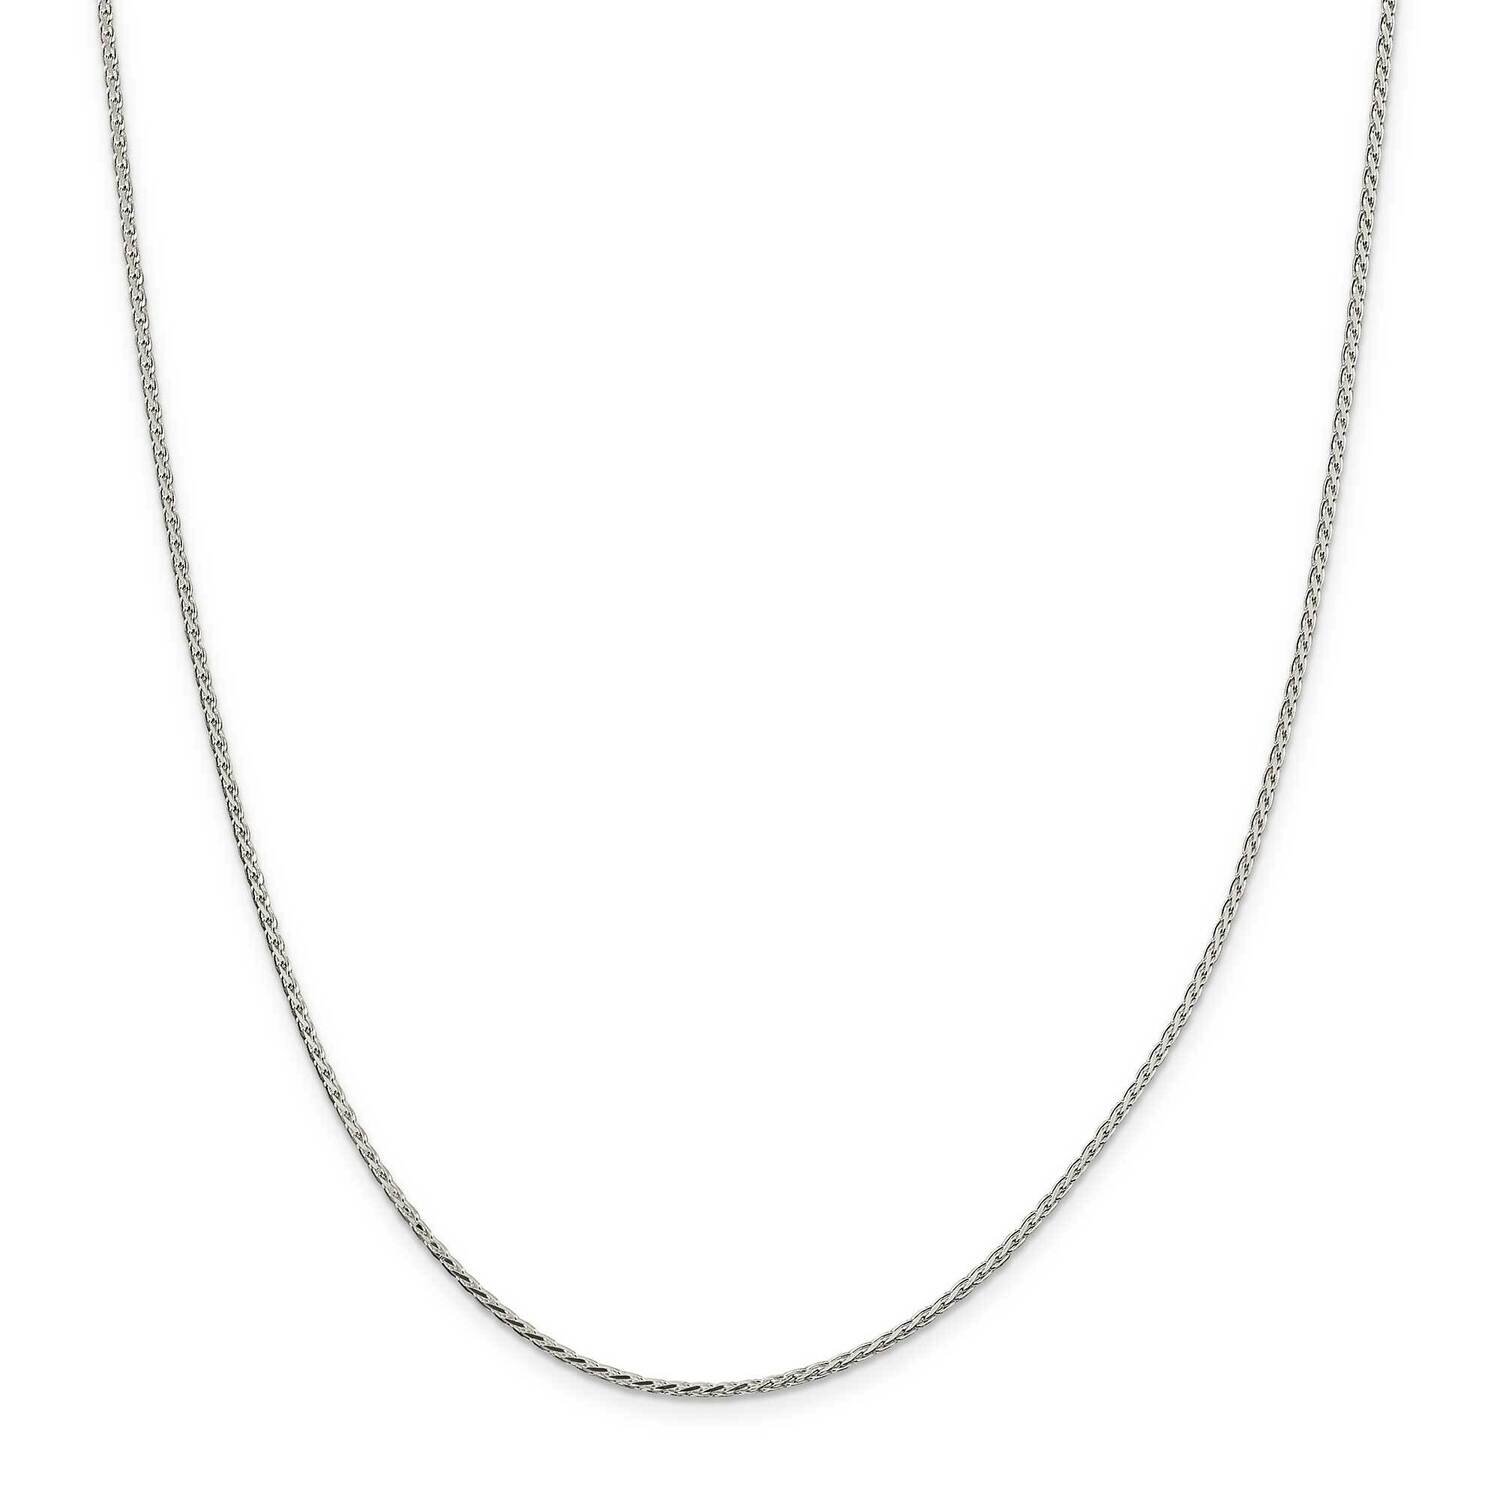 1.7mm Diamond-Cut Round Spiga Chain with 4 Inch Extender 22 Inch Sterling Silver QSR050E-22